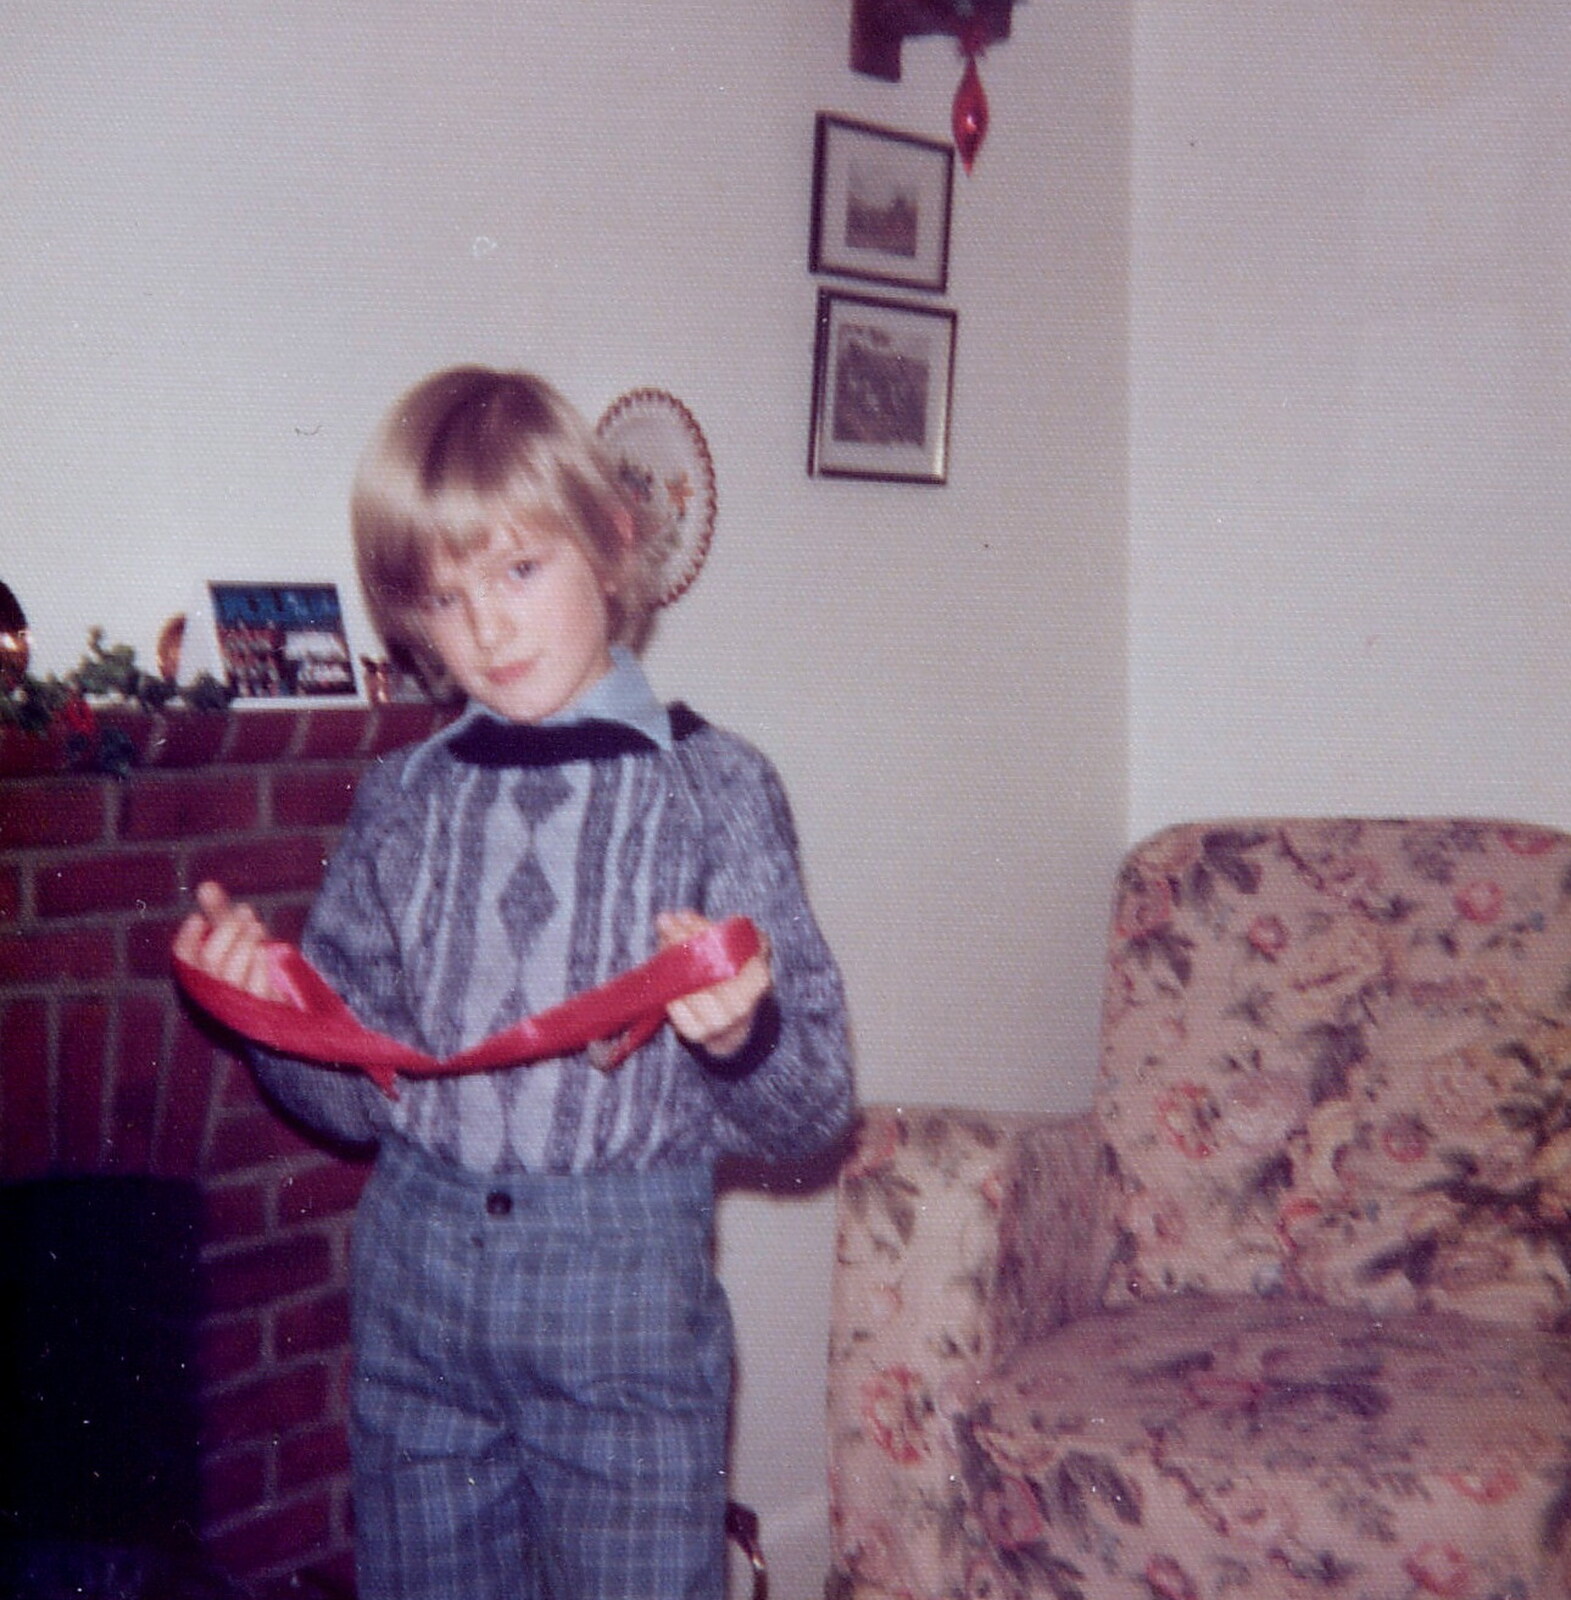 Family History: Danesbury Avenue, Tuckton, Christchurch, Dorset - 24th January 2020: Nosher's got some kind of groovy red belt